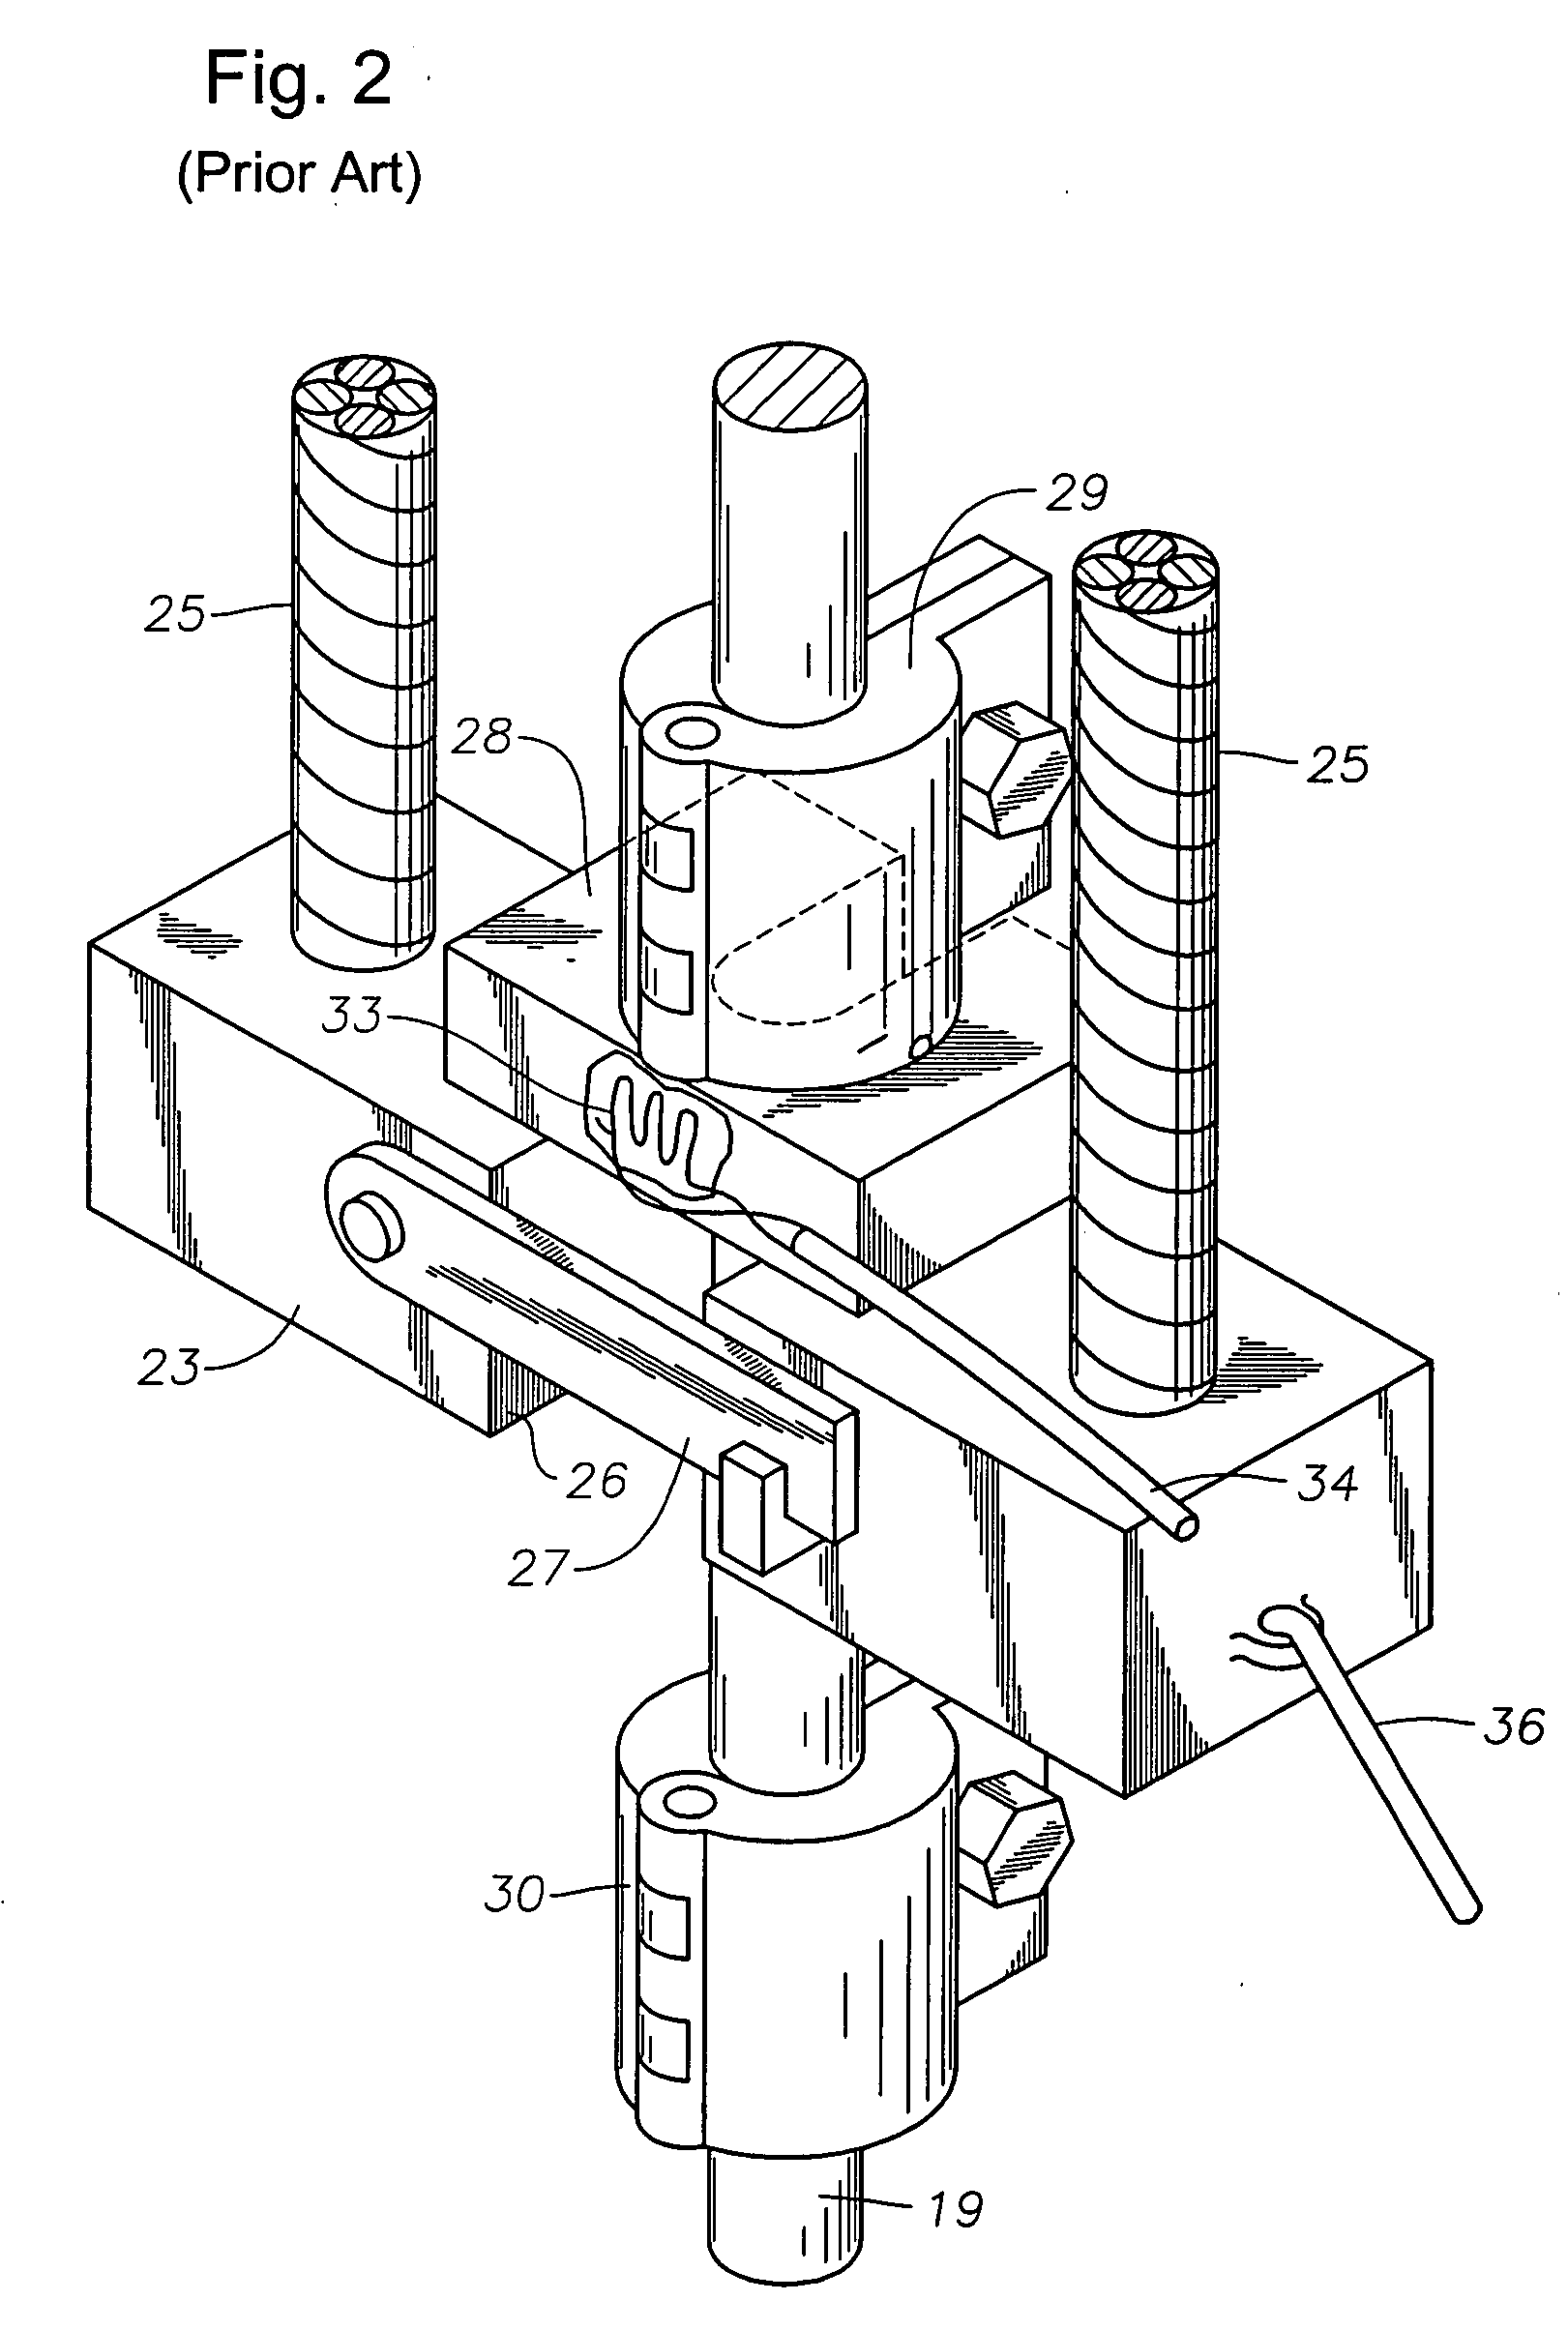 Apparatus for analysis and control of a reciprocating pump system by determination of a pump card